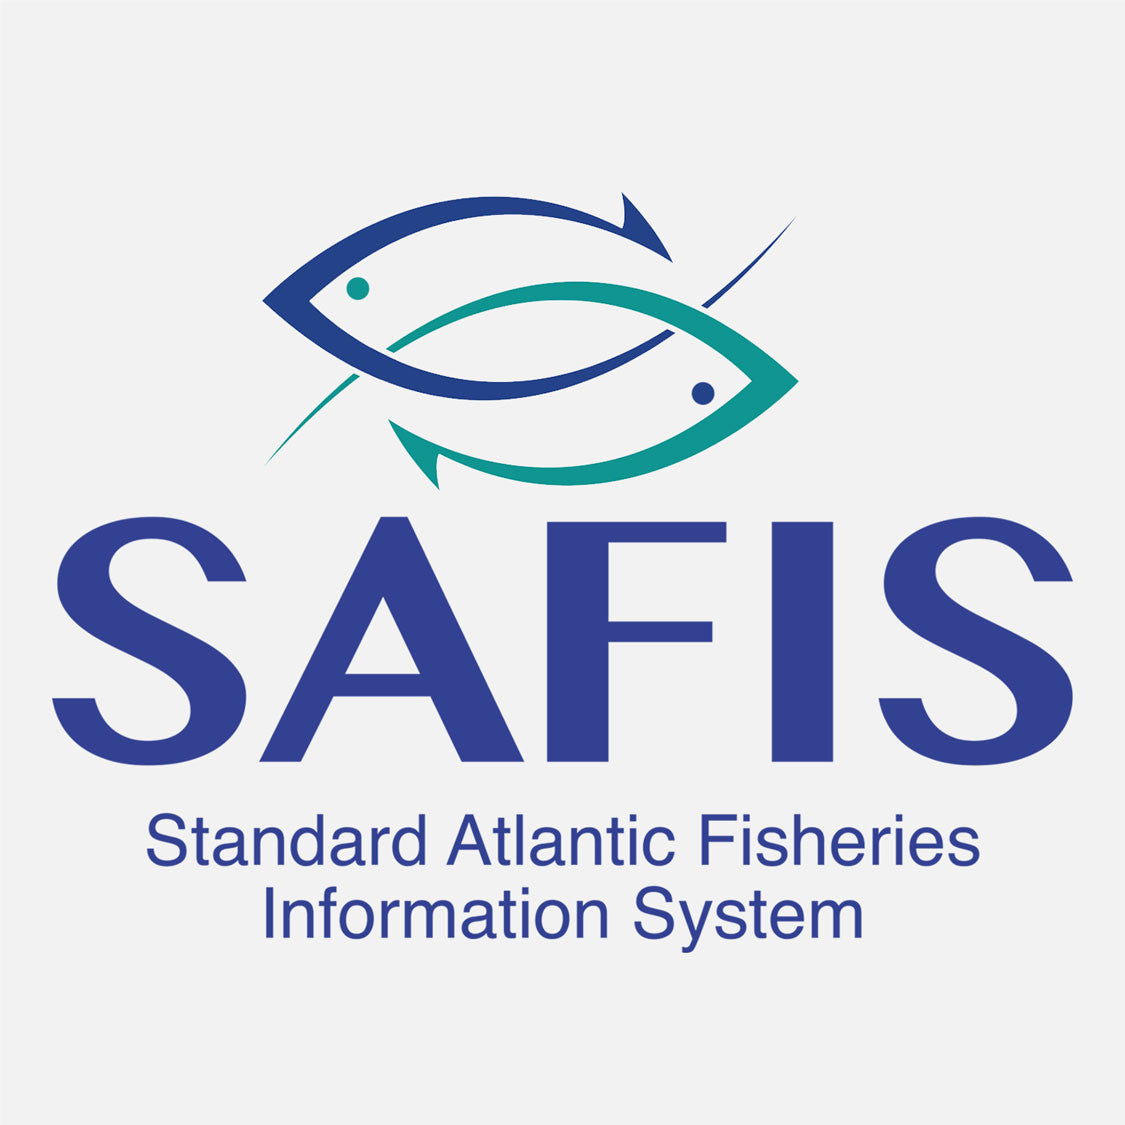 Standard Atlantic Fisheries Information System (SAFIS) allows fishermen to meet the increasing need for real-time commercial landings data. The logo is a graphical depiction of fish hooks.